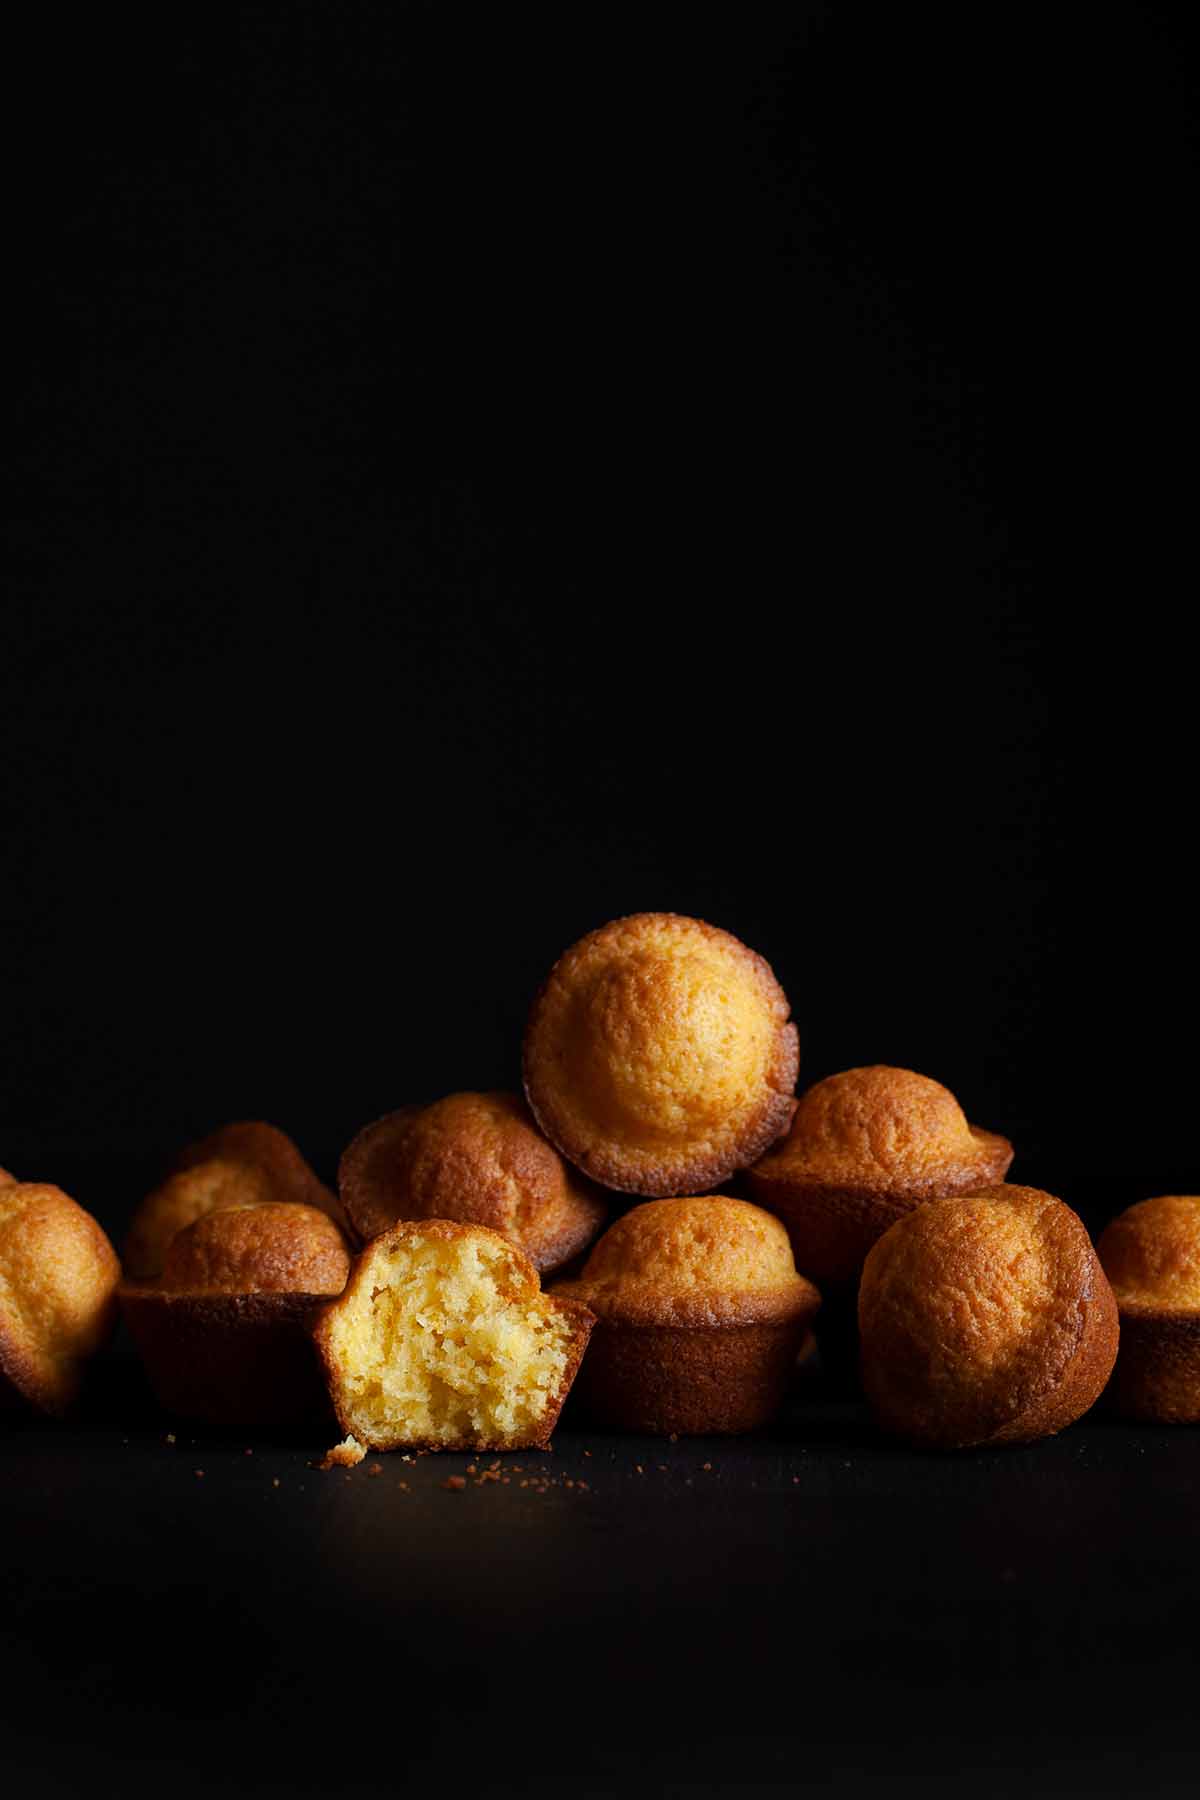 Portuguese mini lemon-orange cakes scattered on a black background with one torn in half.